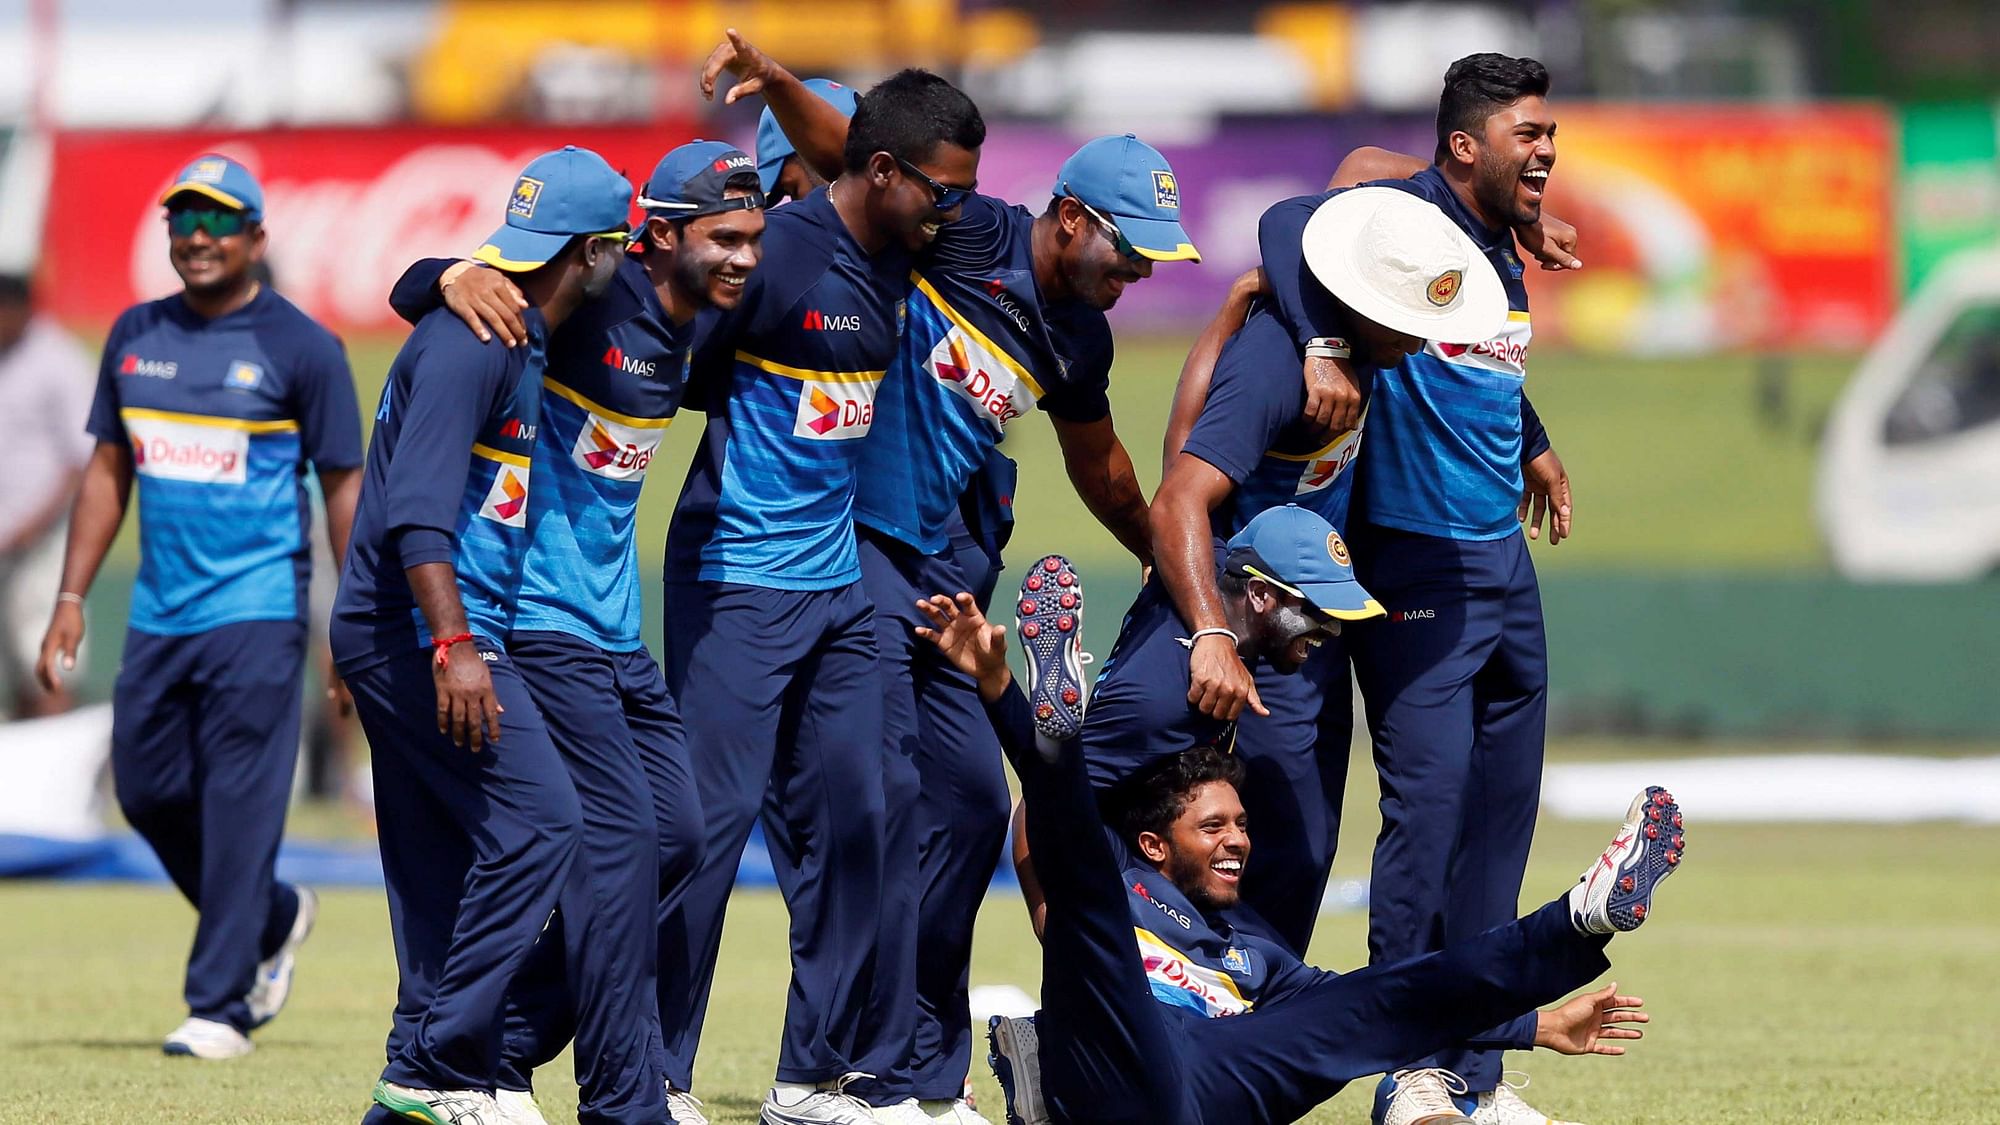 Members of the Sri Lankan Test team before a match against India earlier this month.